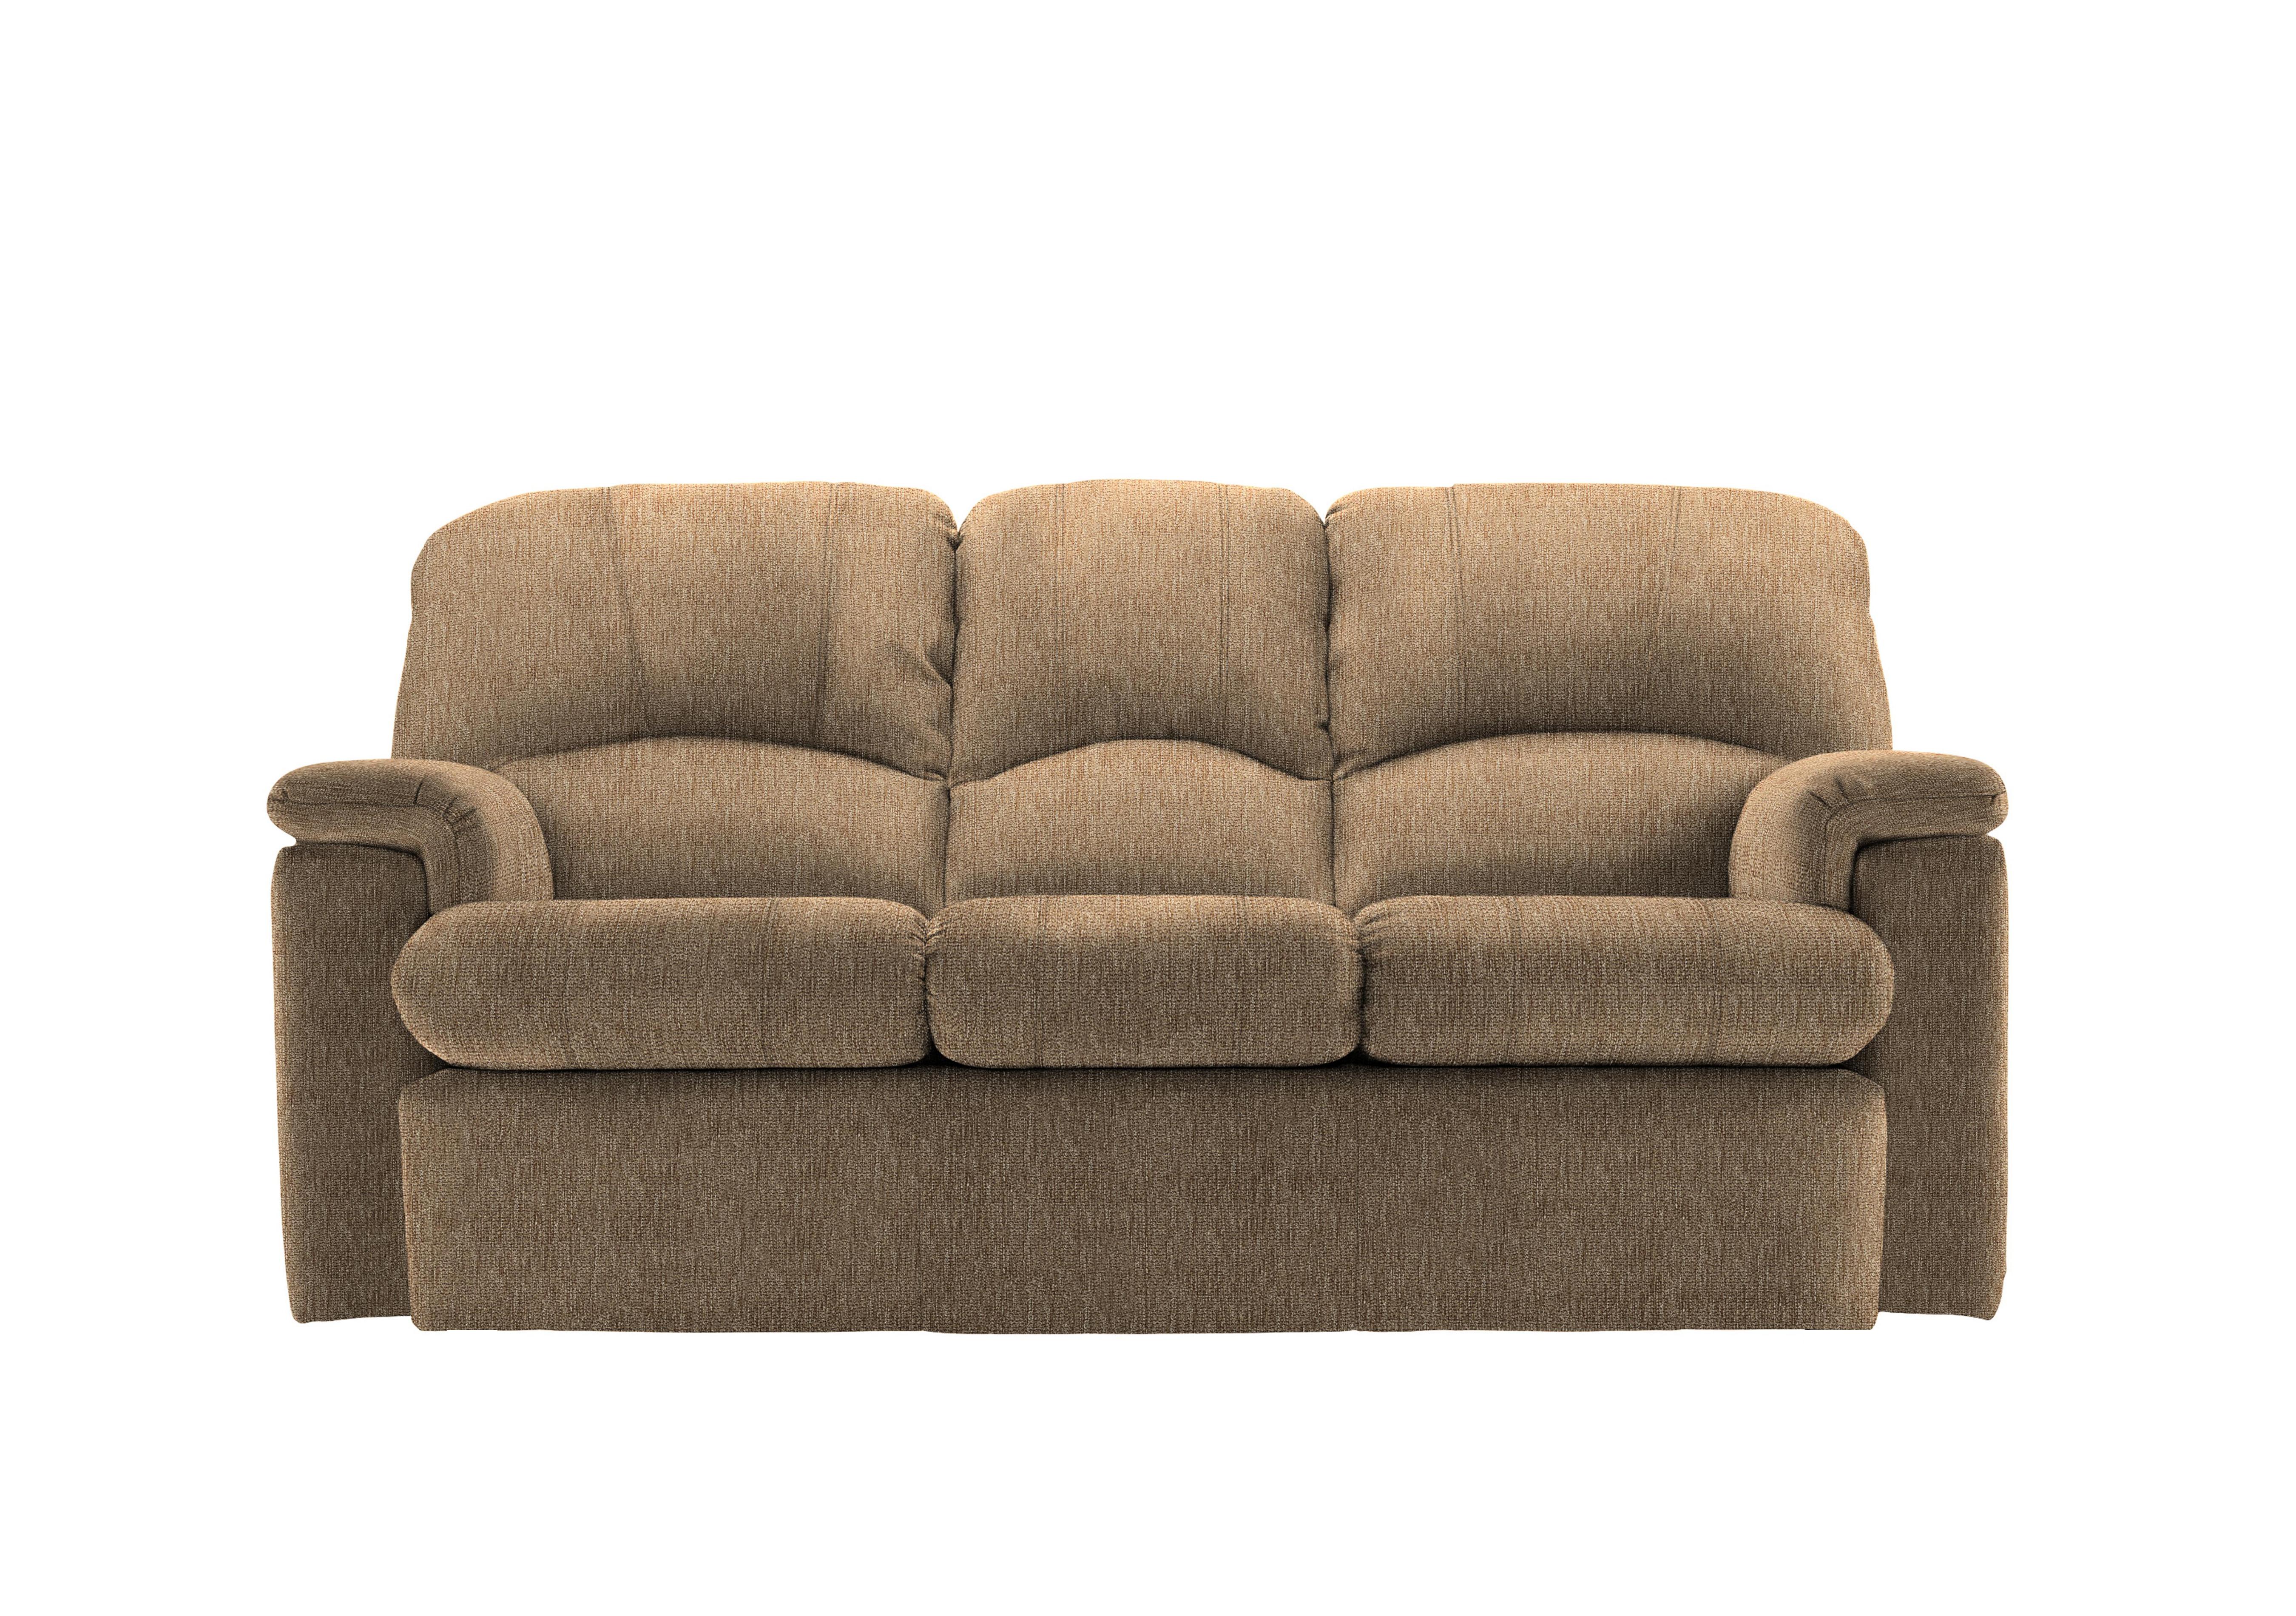 Chloe 3 Seater Fabric Sofa in A070 Boucle Cocoa on Furniture Village